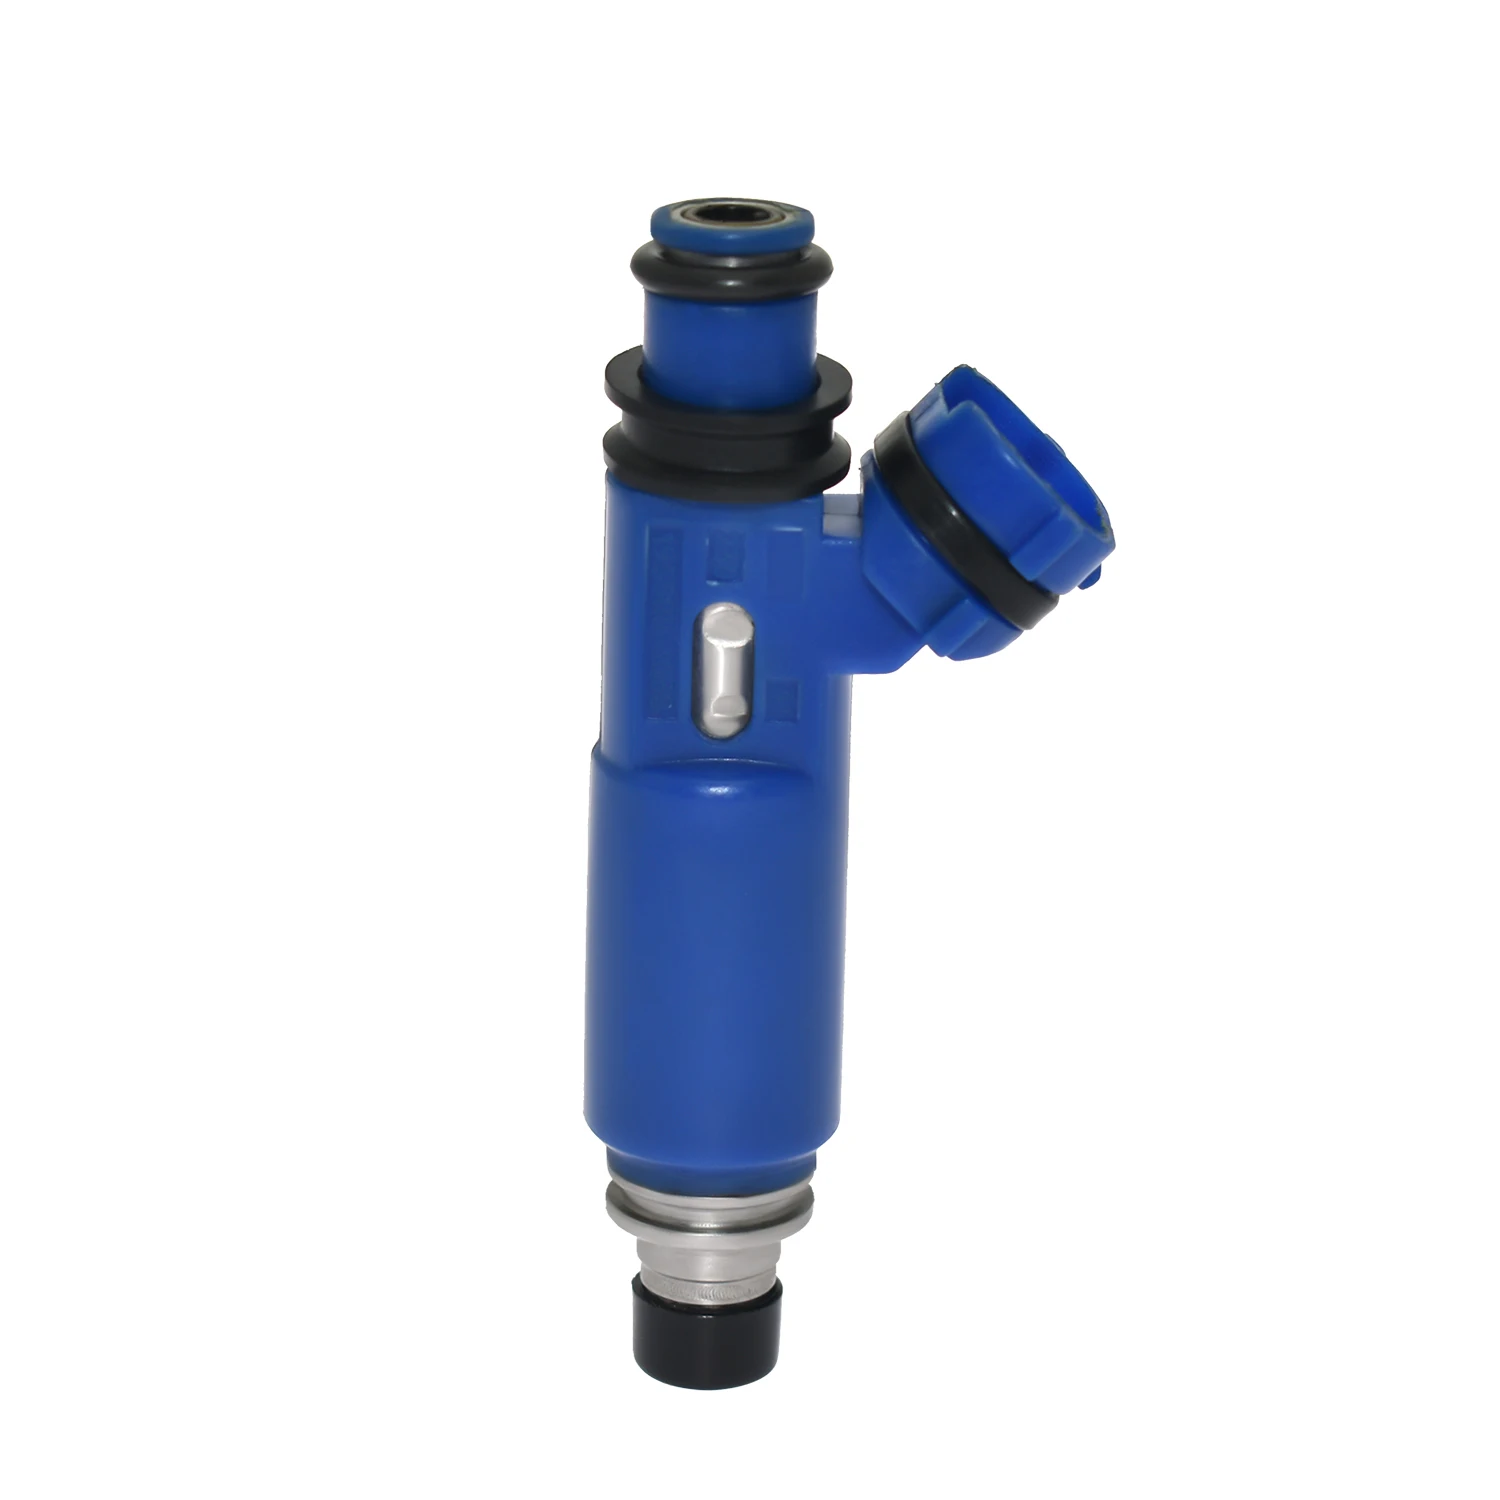 

Fuel injection nozzle 195500-3030 Provides excellent performance, Easy to install